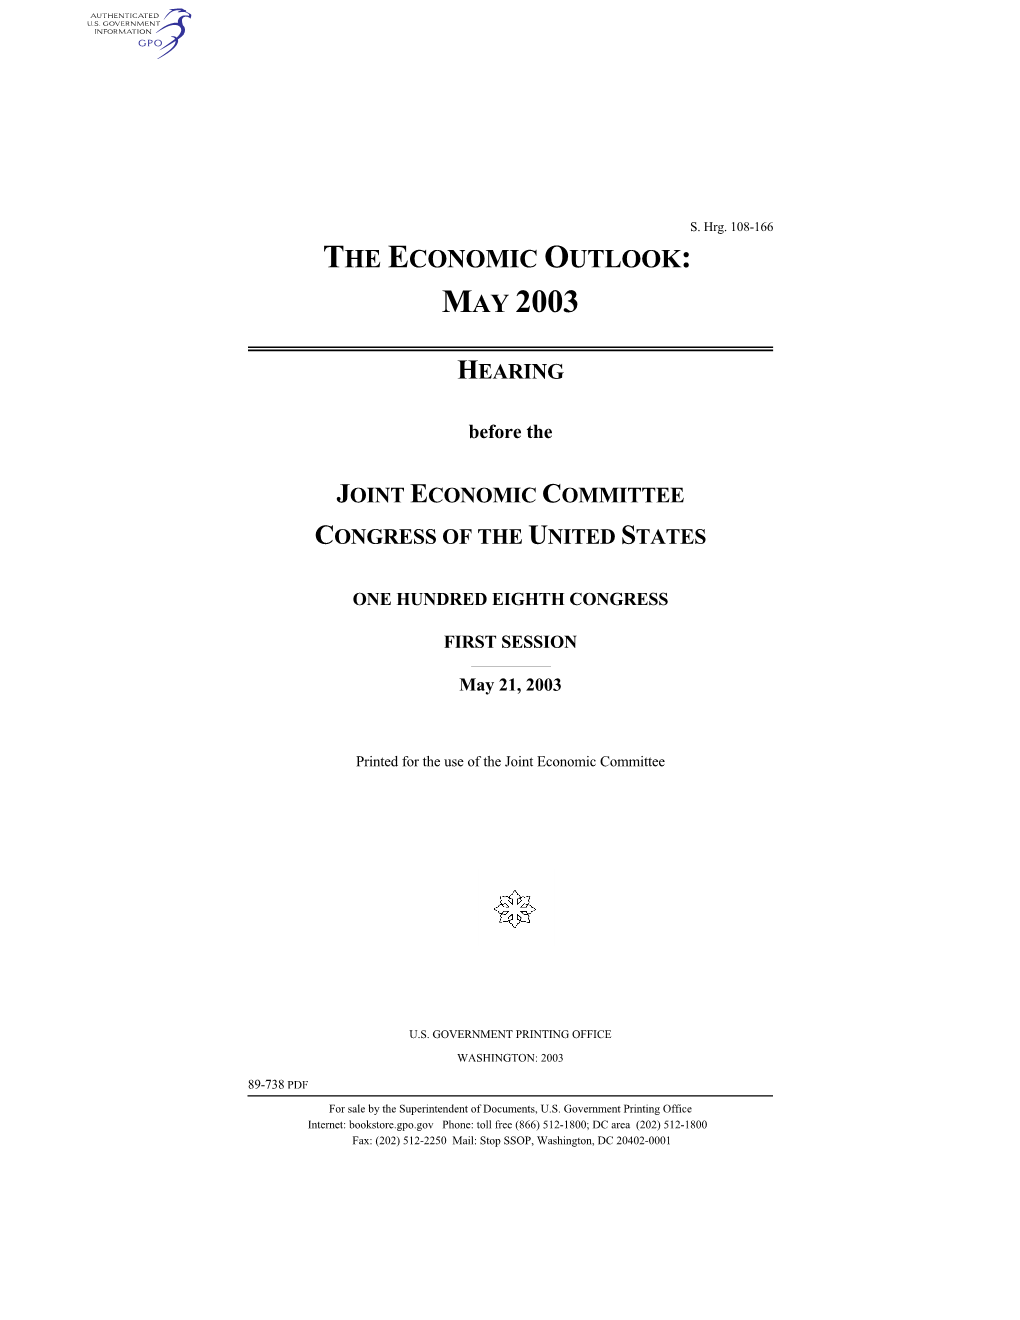 Joint Economic Committee Congress of the United States